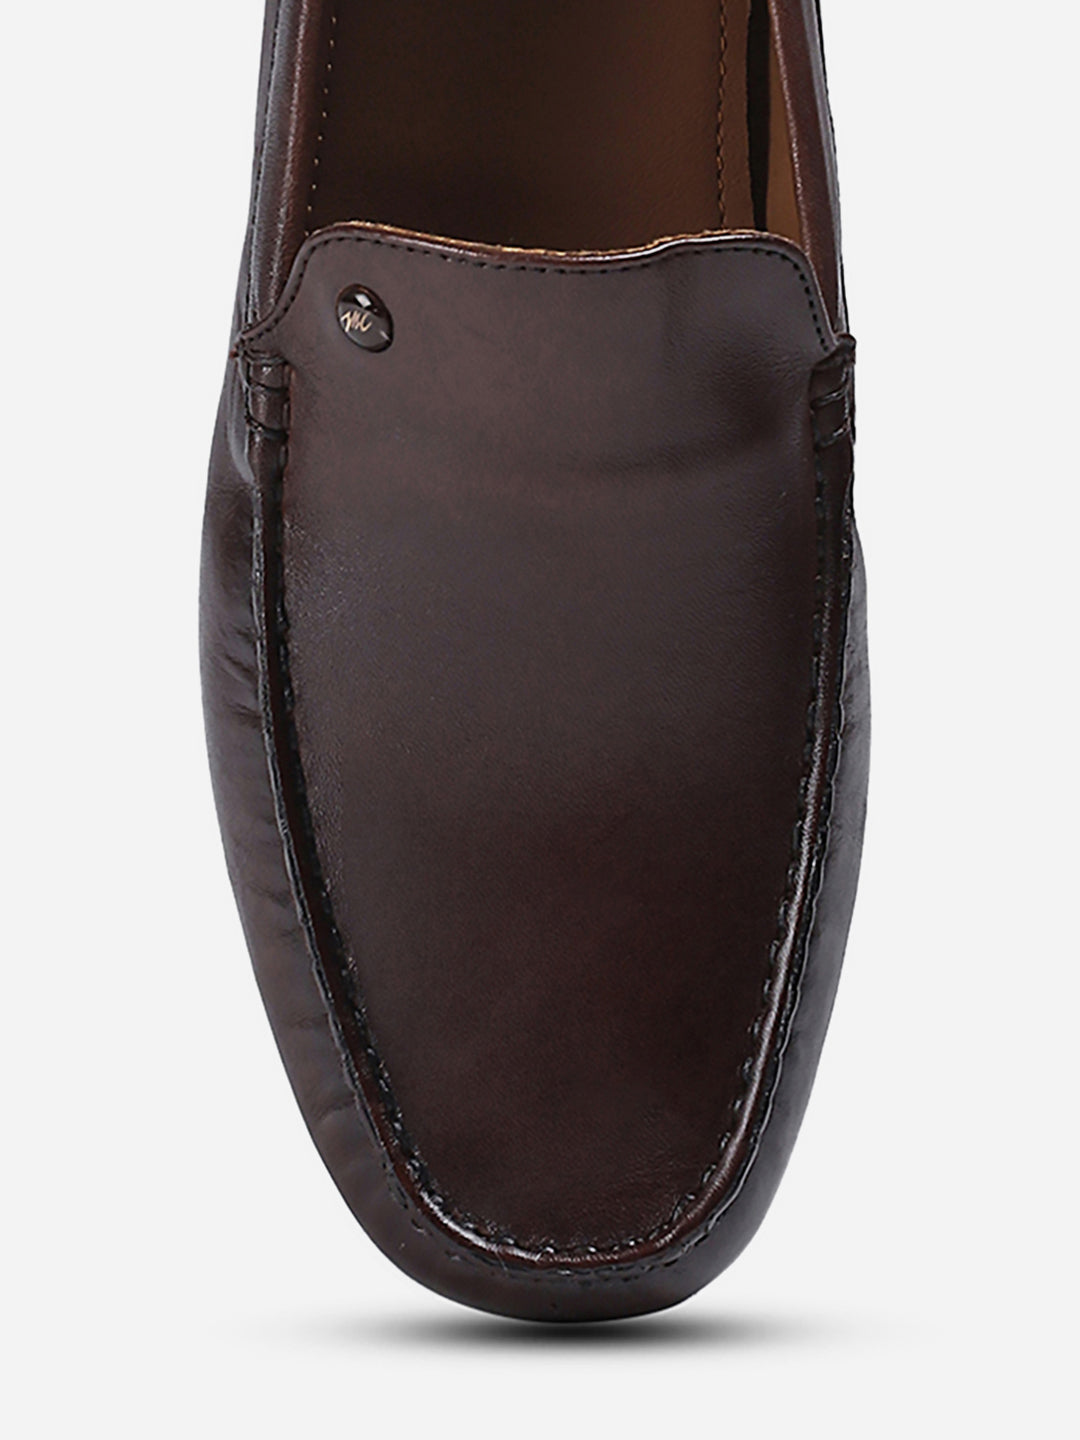 Men Brown Slip on Genuine Leather Loafers